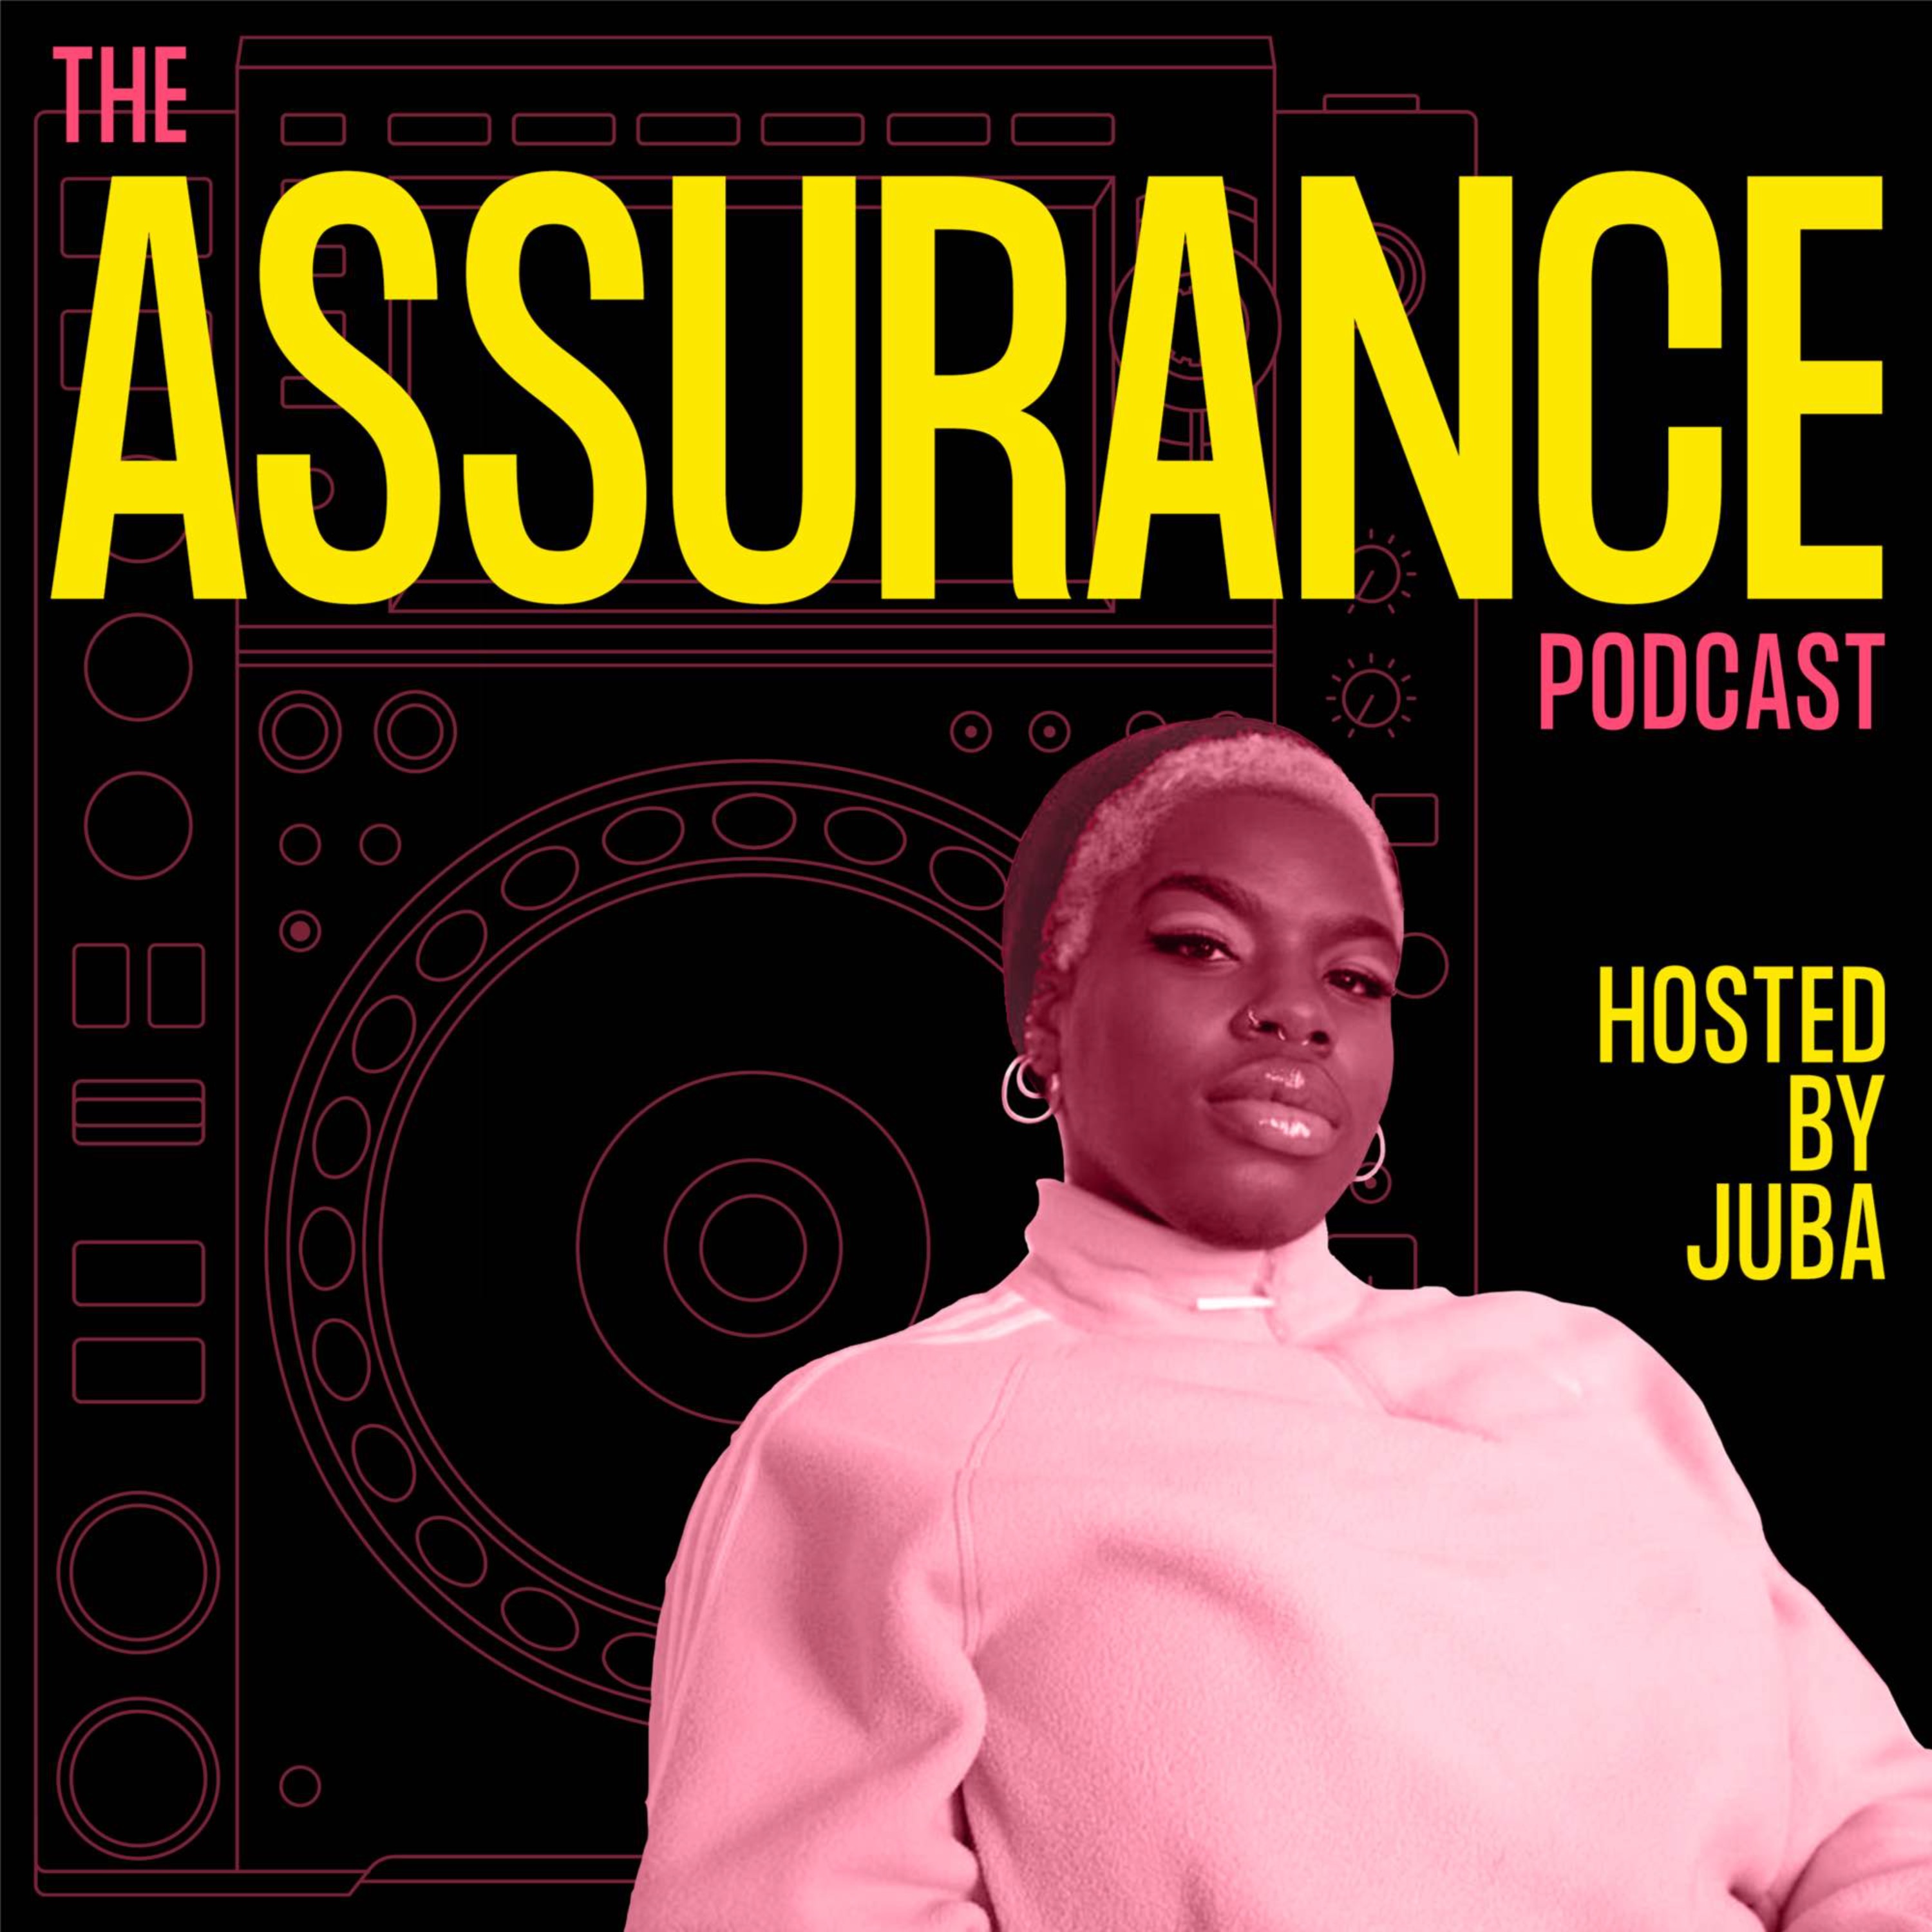 The Assurance Podcast podcast show image